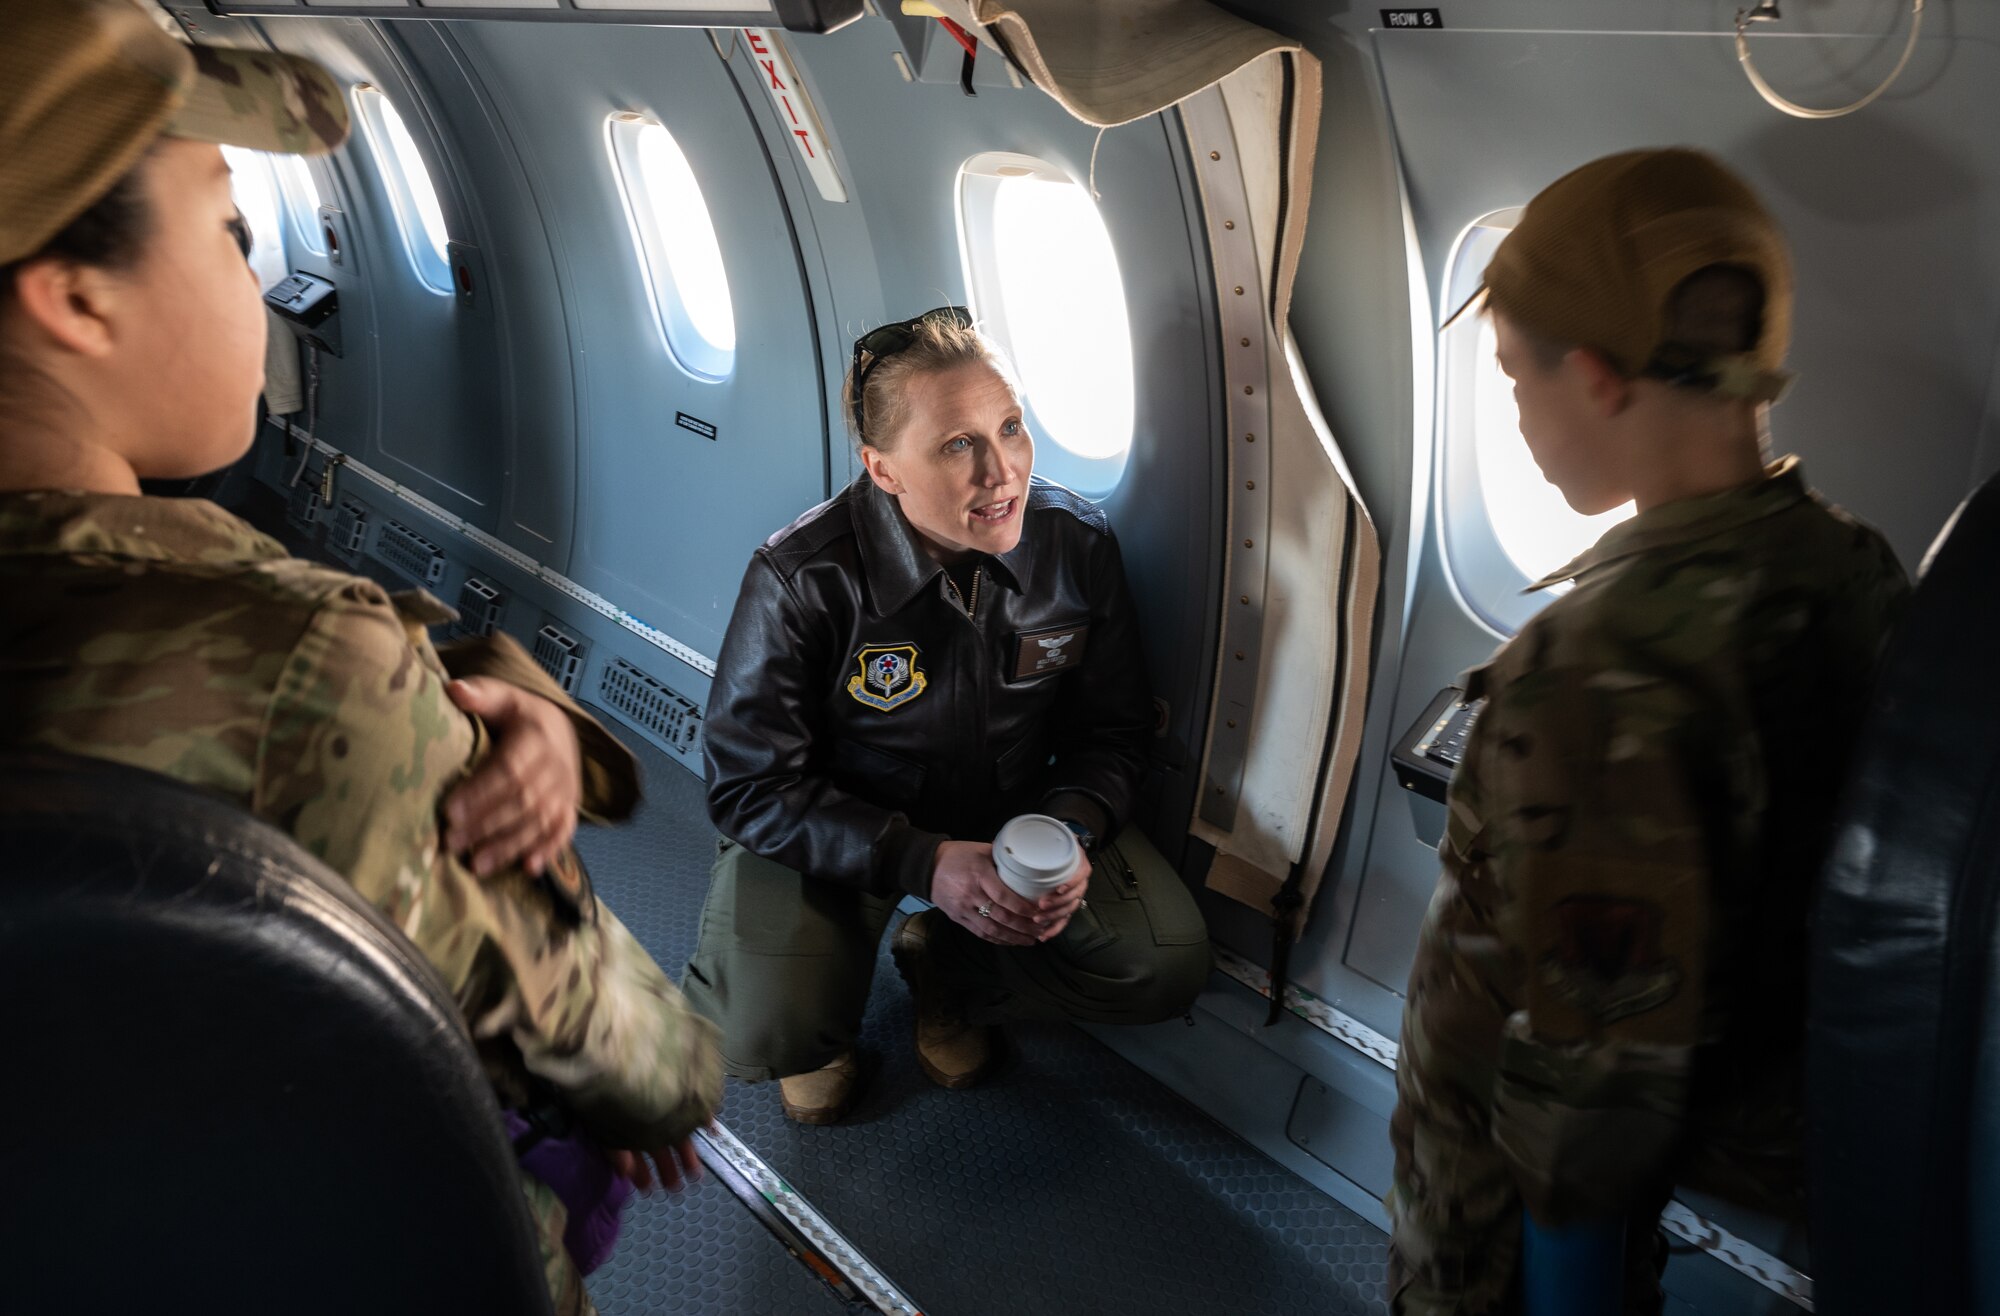 U.S. Air Force Maj. Molly Sexton, a 524th Special Operations Squadron instructor pilot, discusses the capabilities of the C-146A Wolfhound aircraft with some of the youth visiting a youth open house event March 12, 2022, at Moody Air Force Base, Georgia.